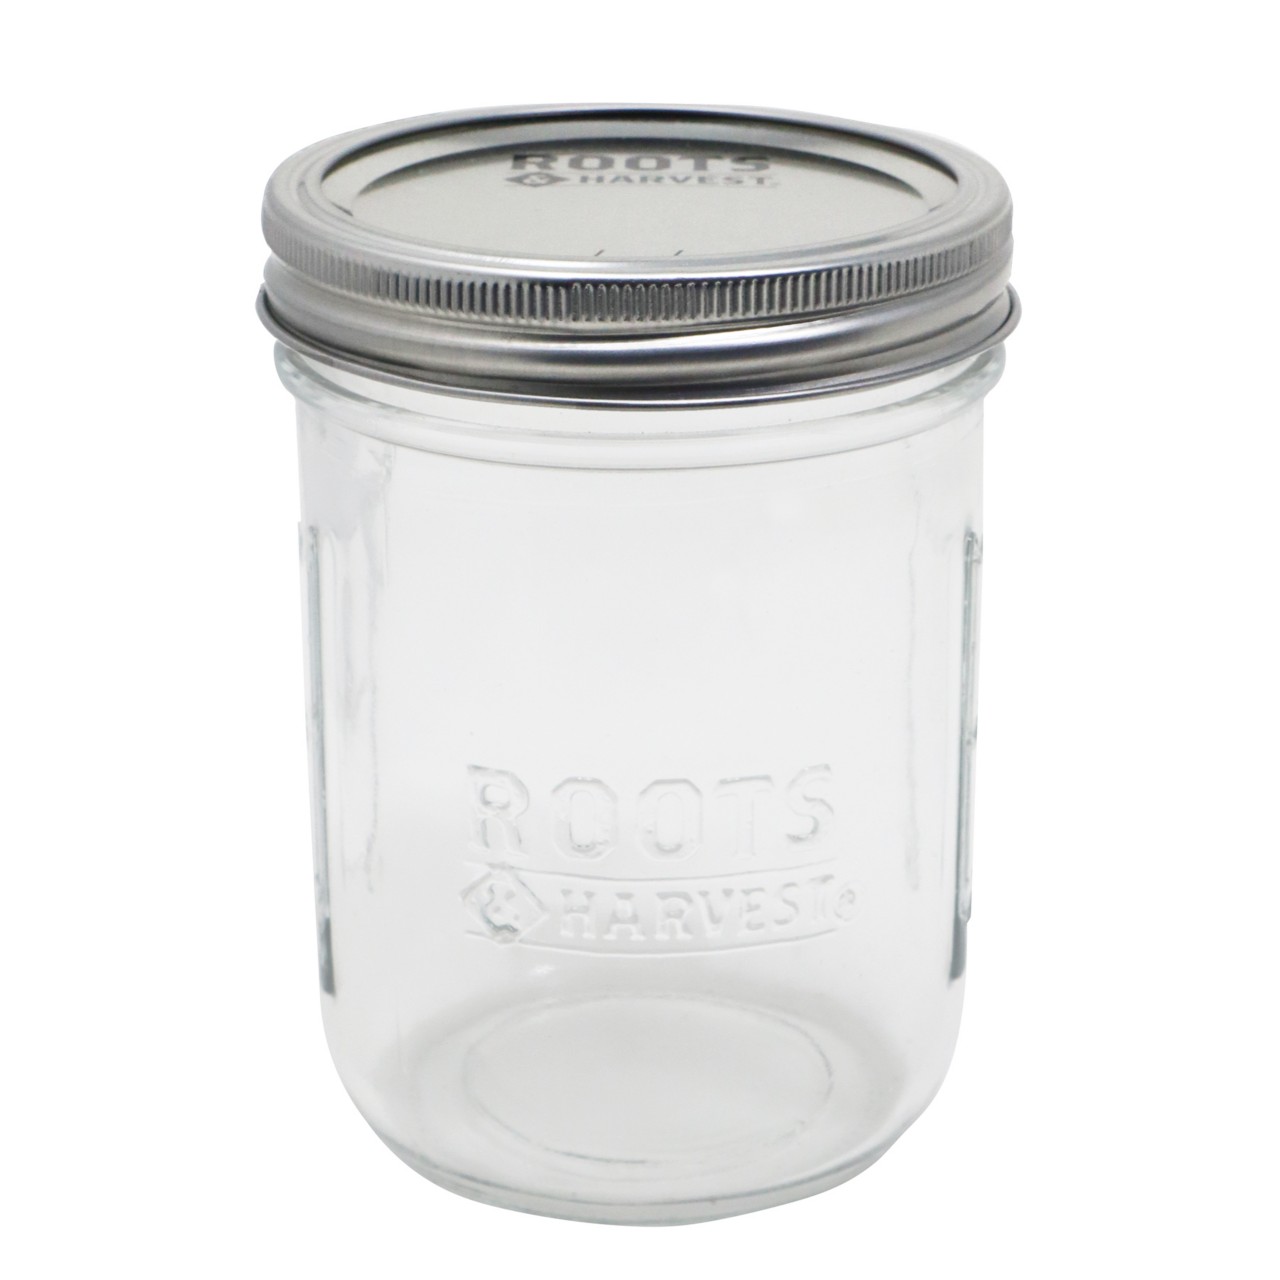 Image of a Ball canning jar.